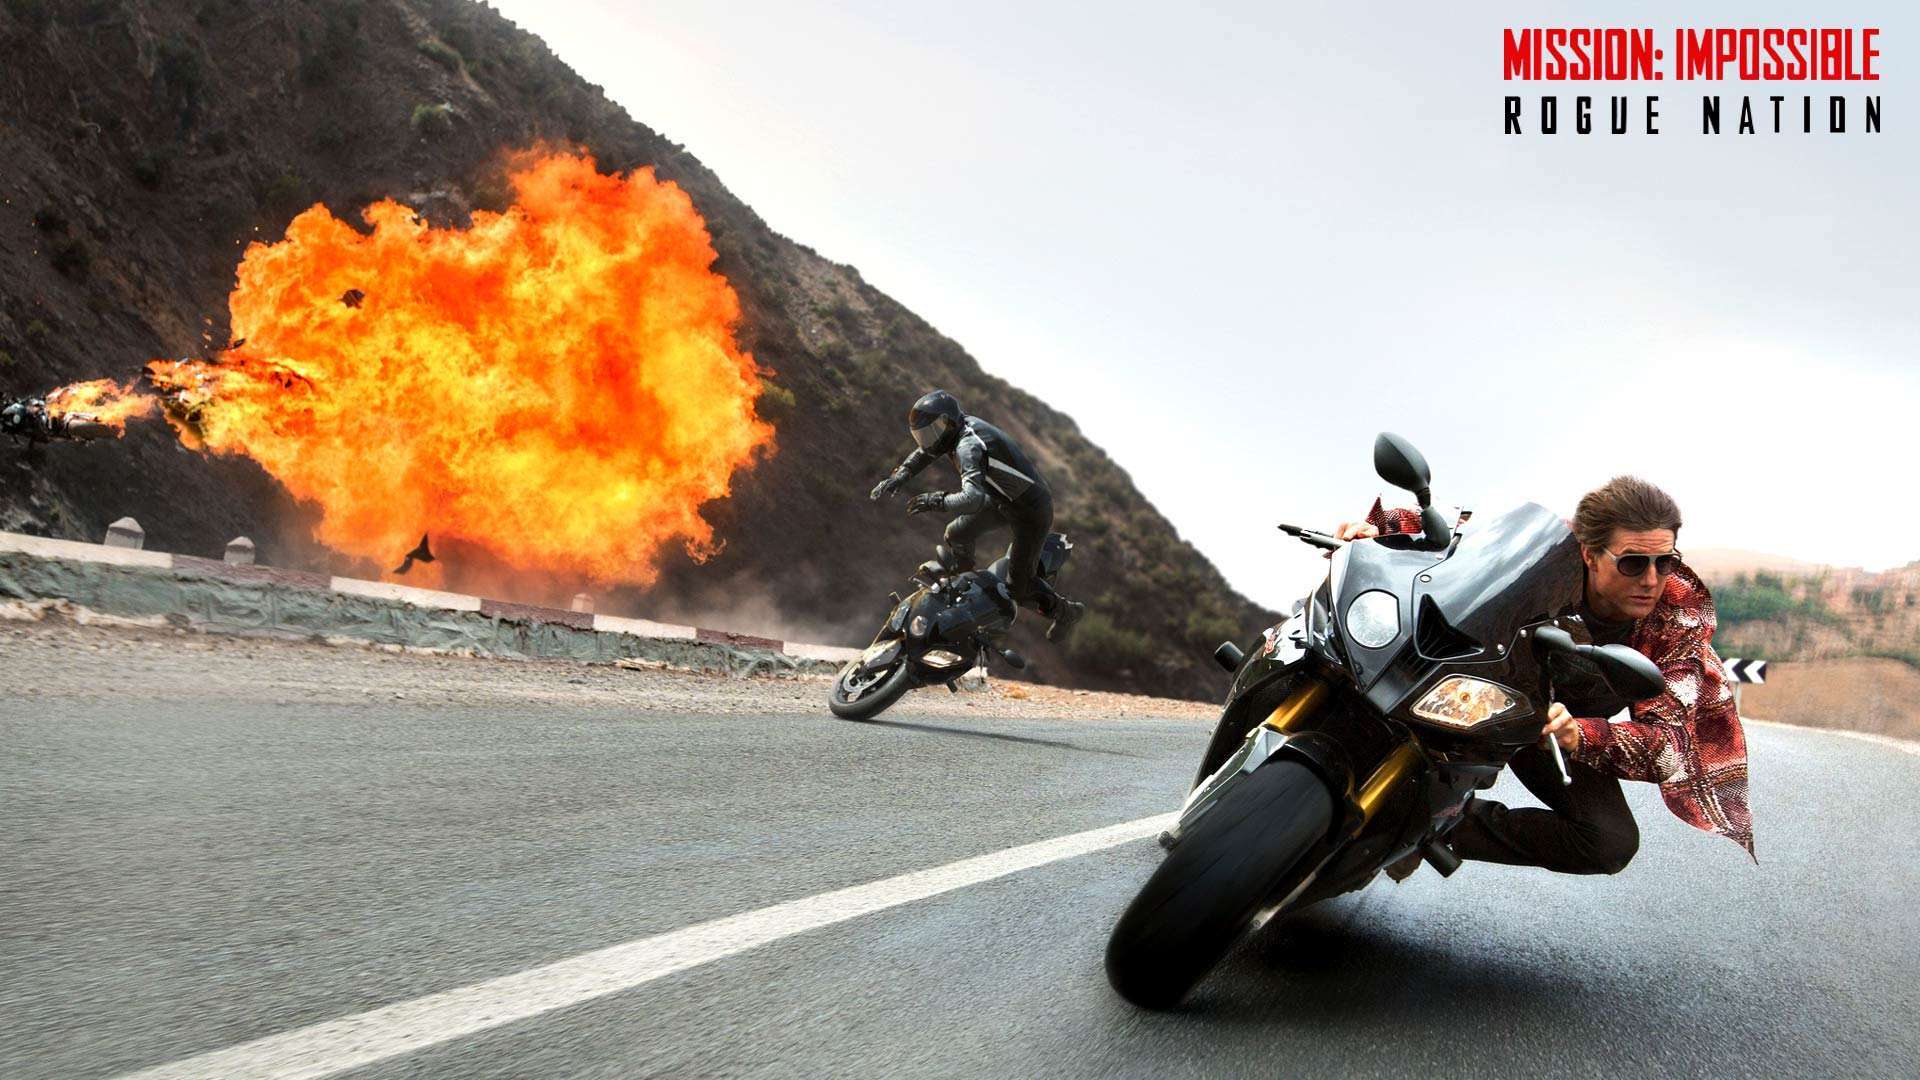 Download Mission Impossible Rogue Nation Hd Wallpaper 21. Guns